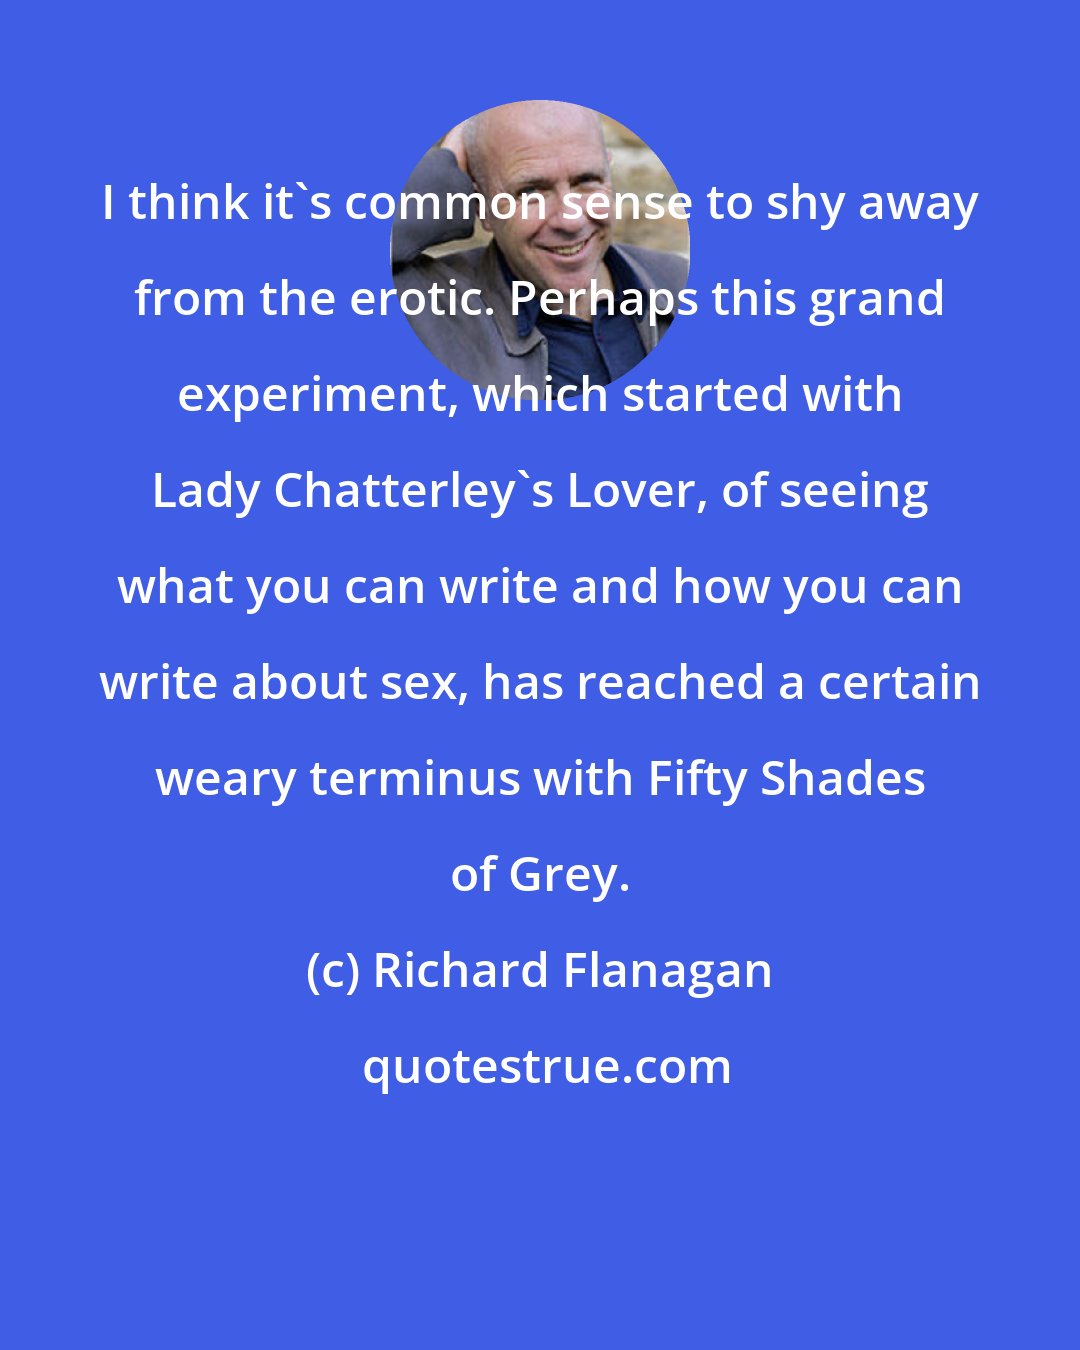 Richard Flanagan: I think it's common sense to shy away from the erotic. Perhaps this grand experiment, which started with Lady Chatterley's Lover, of seeing what you can write and how you can write about sex, has reached a certain weary terminus with Fifty Shades of Grey.